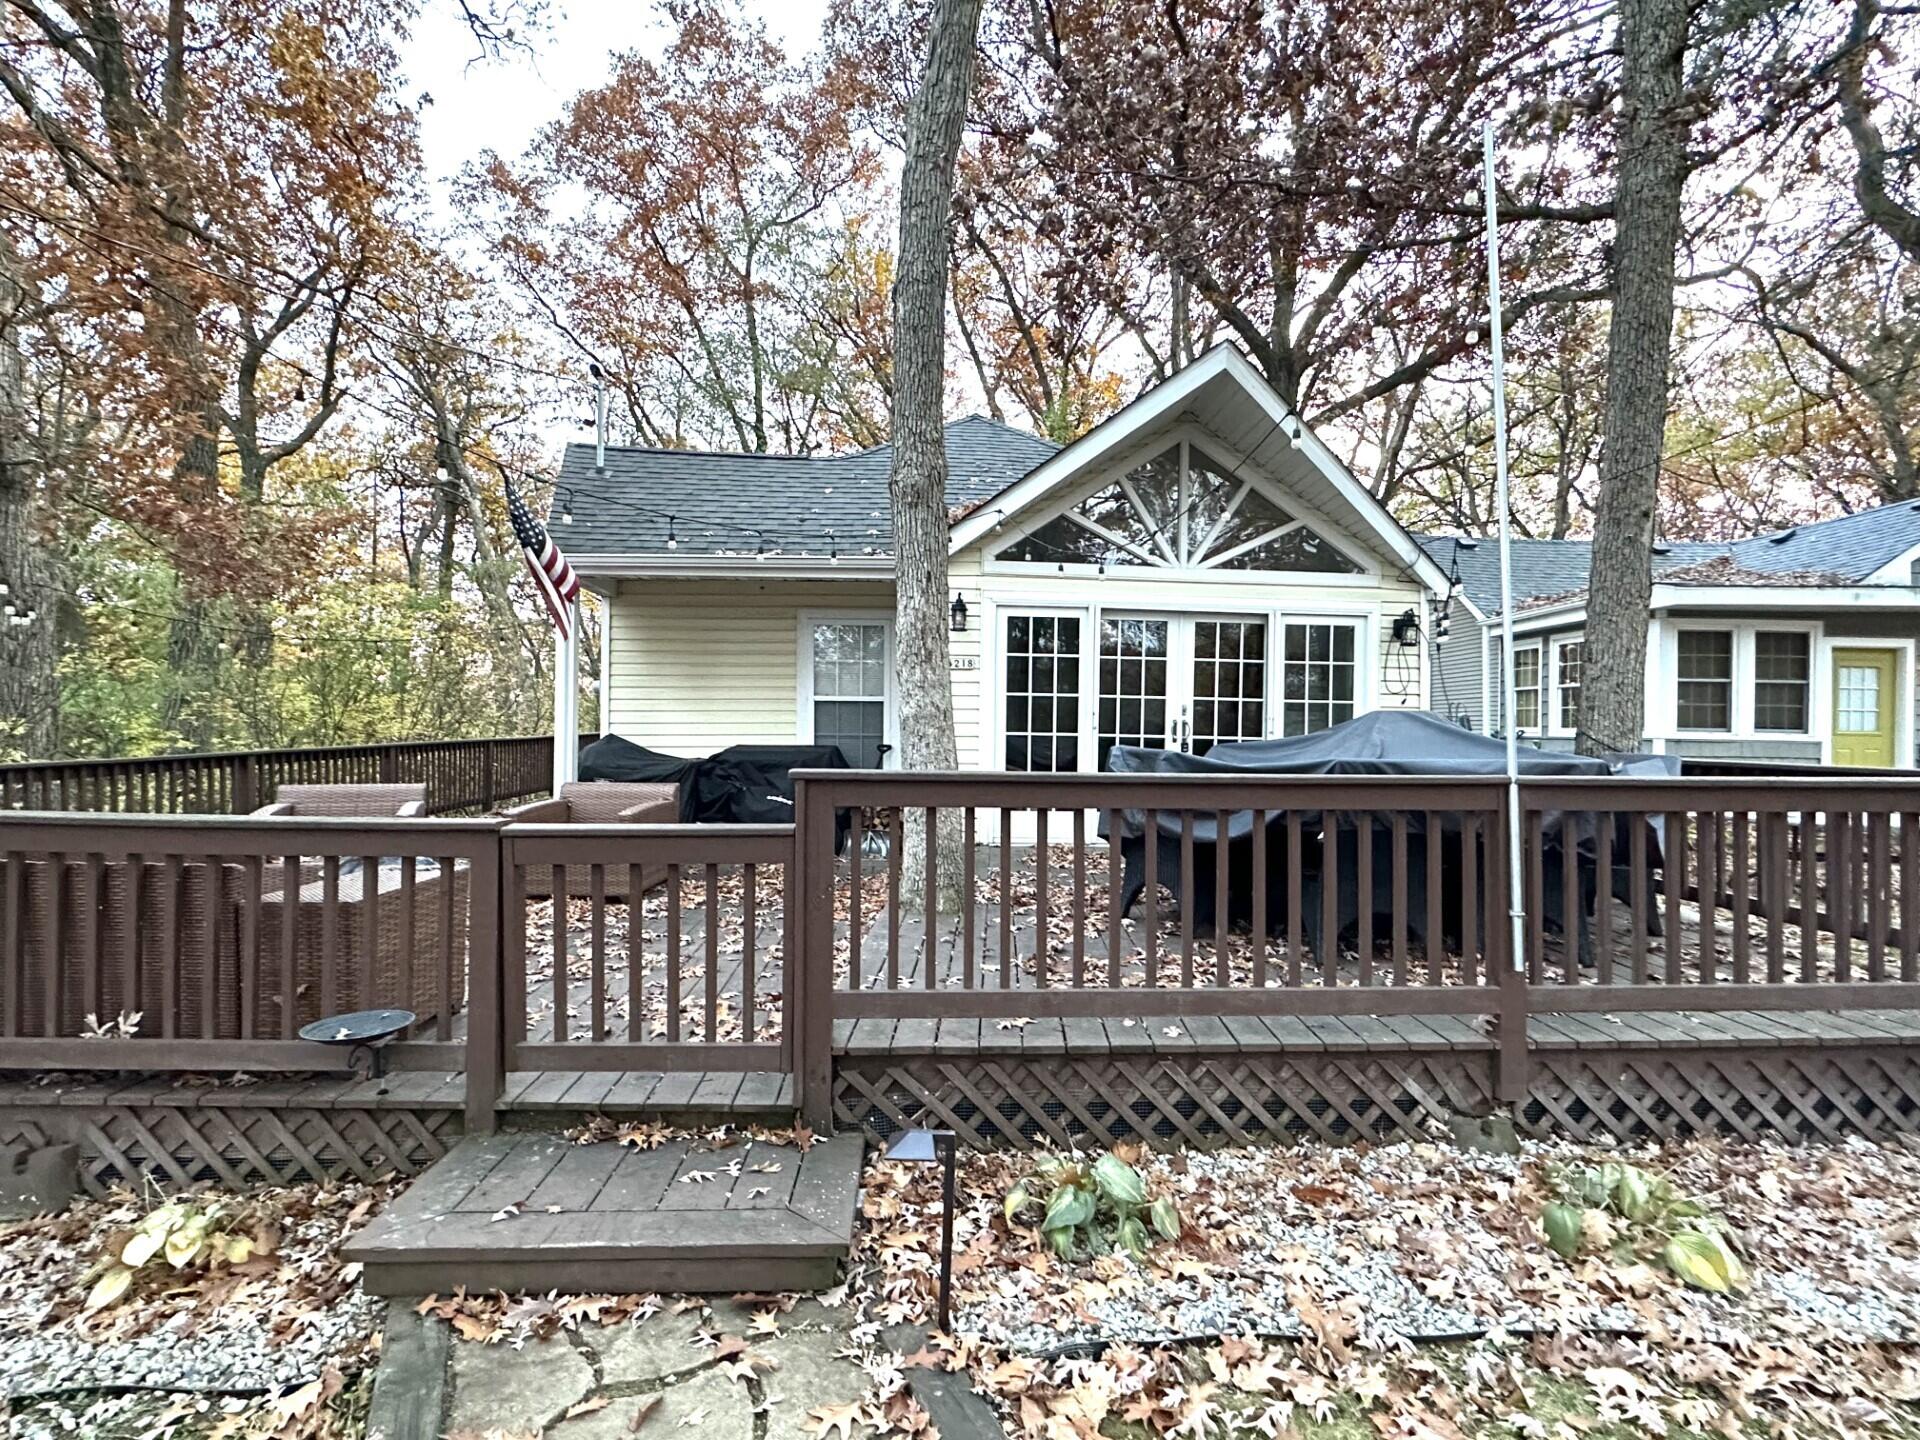 Linn wi home for sale